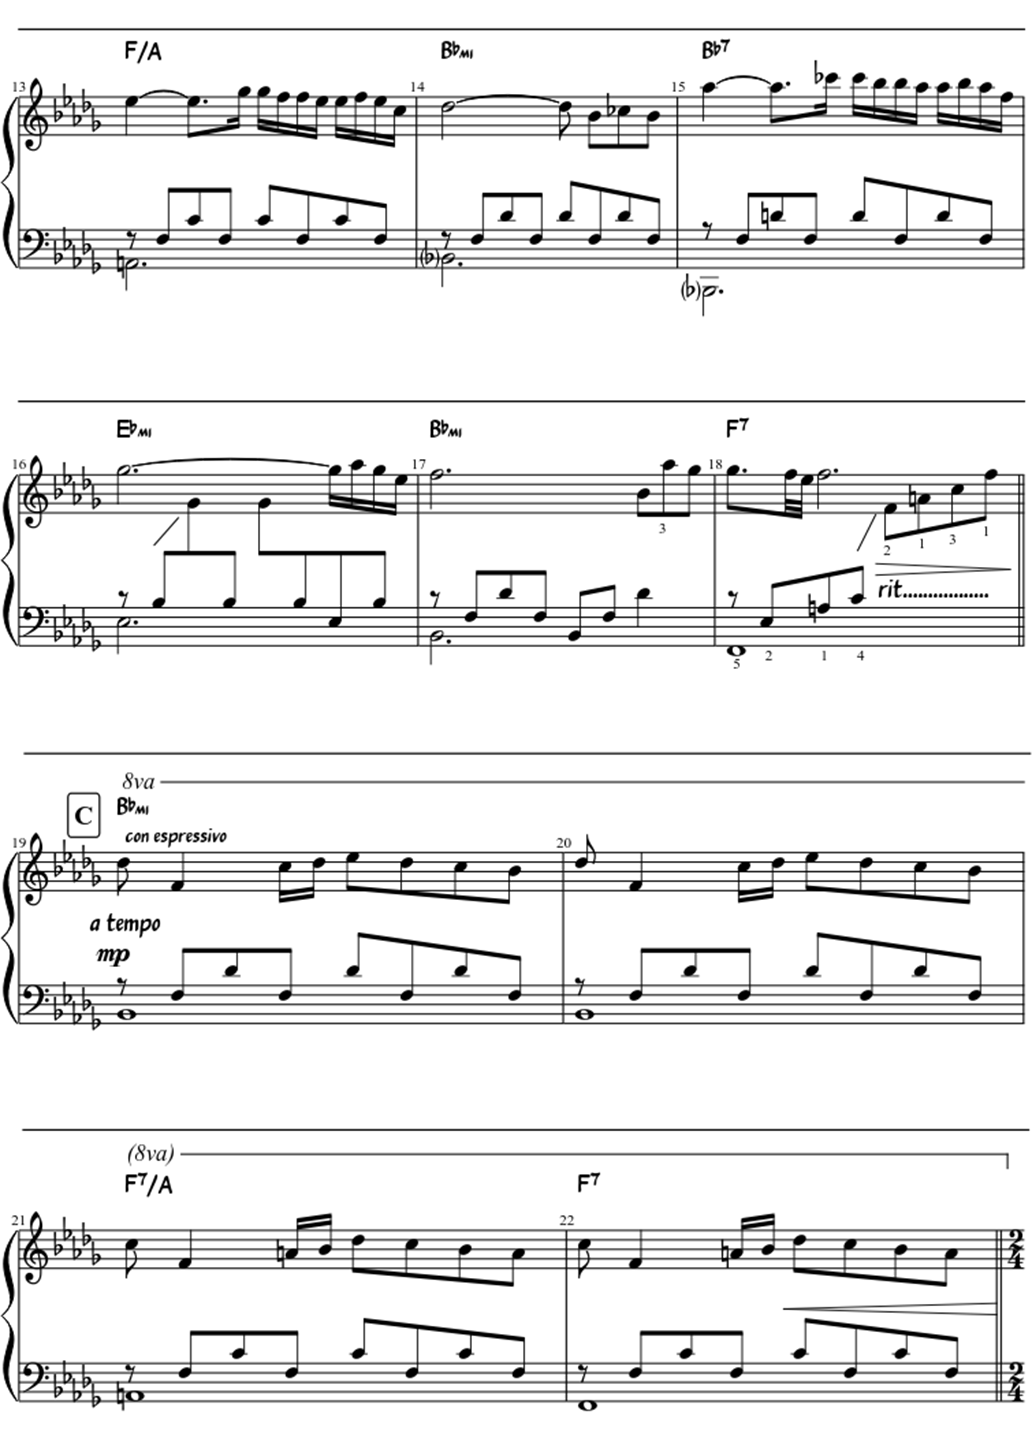 A comme amour sheet music notes 2